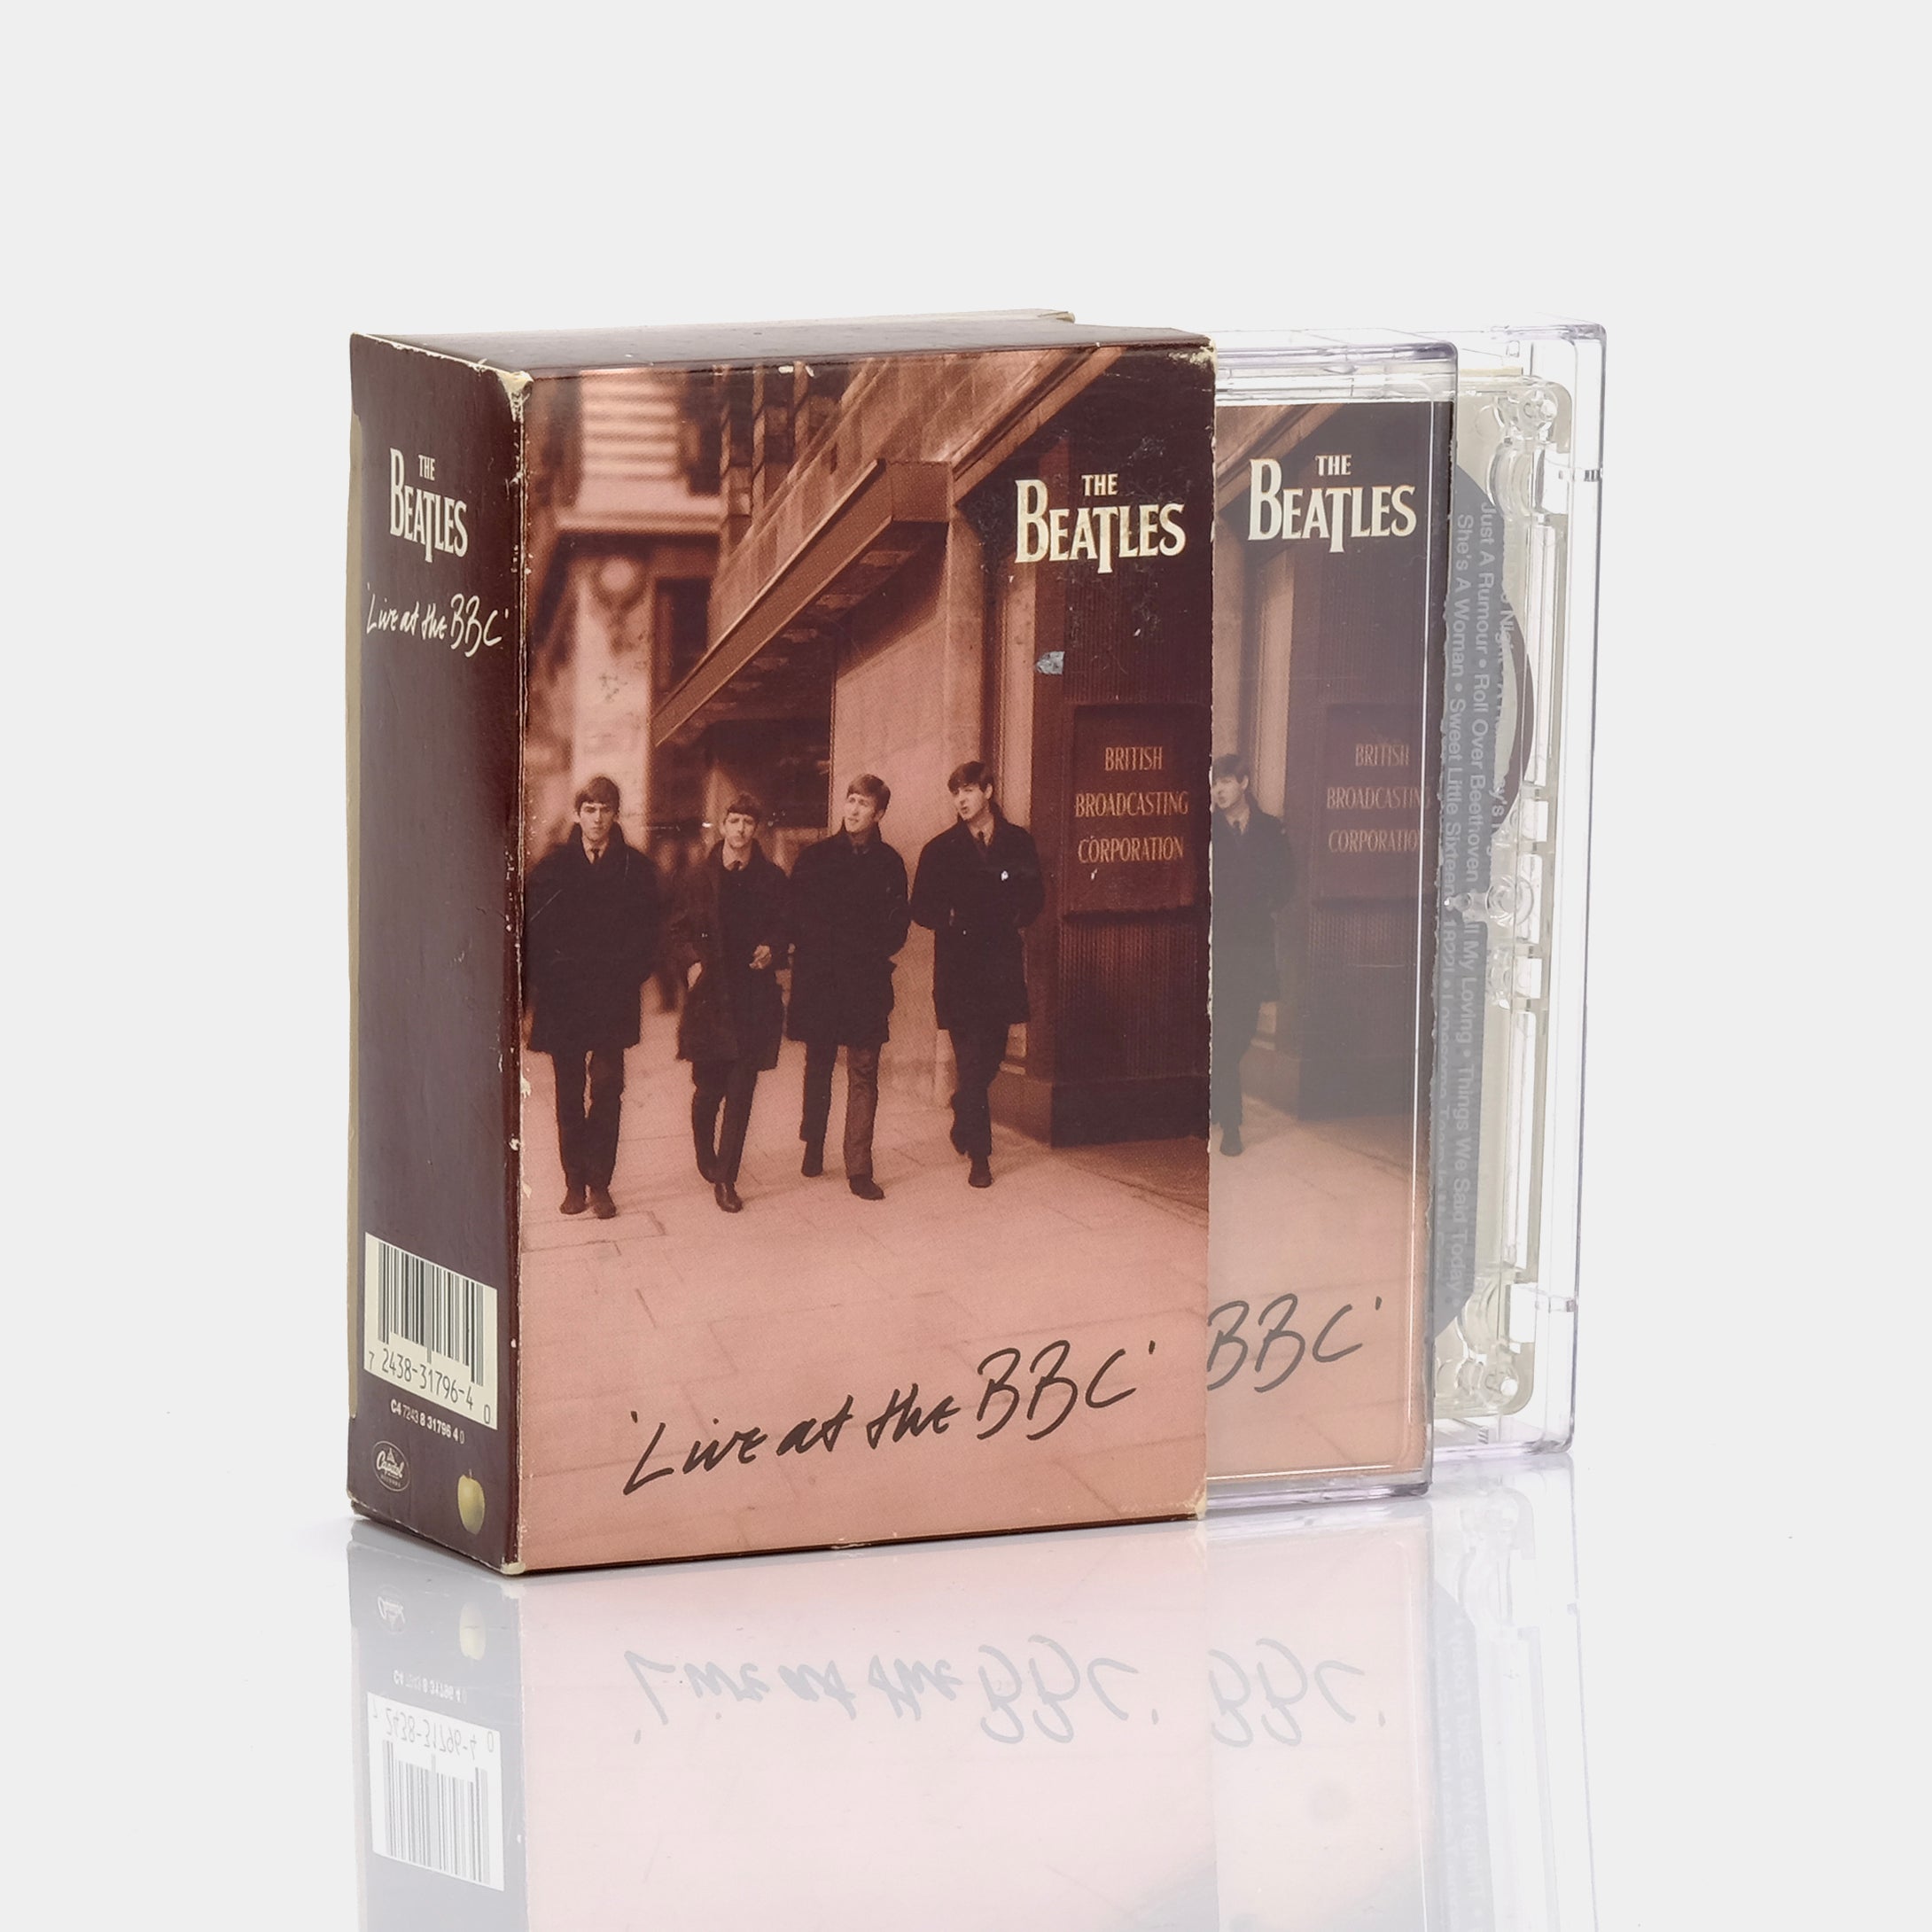 The Beatles - Live at the BBC Cassette Tape